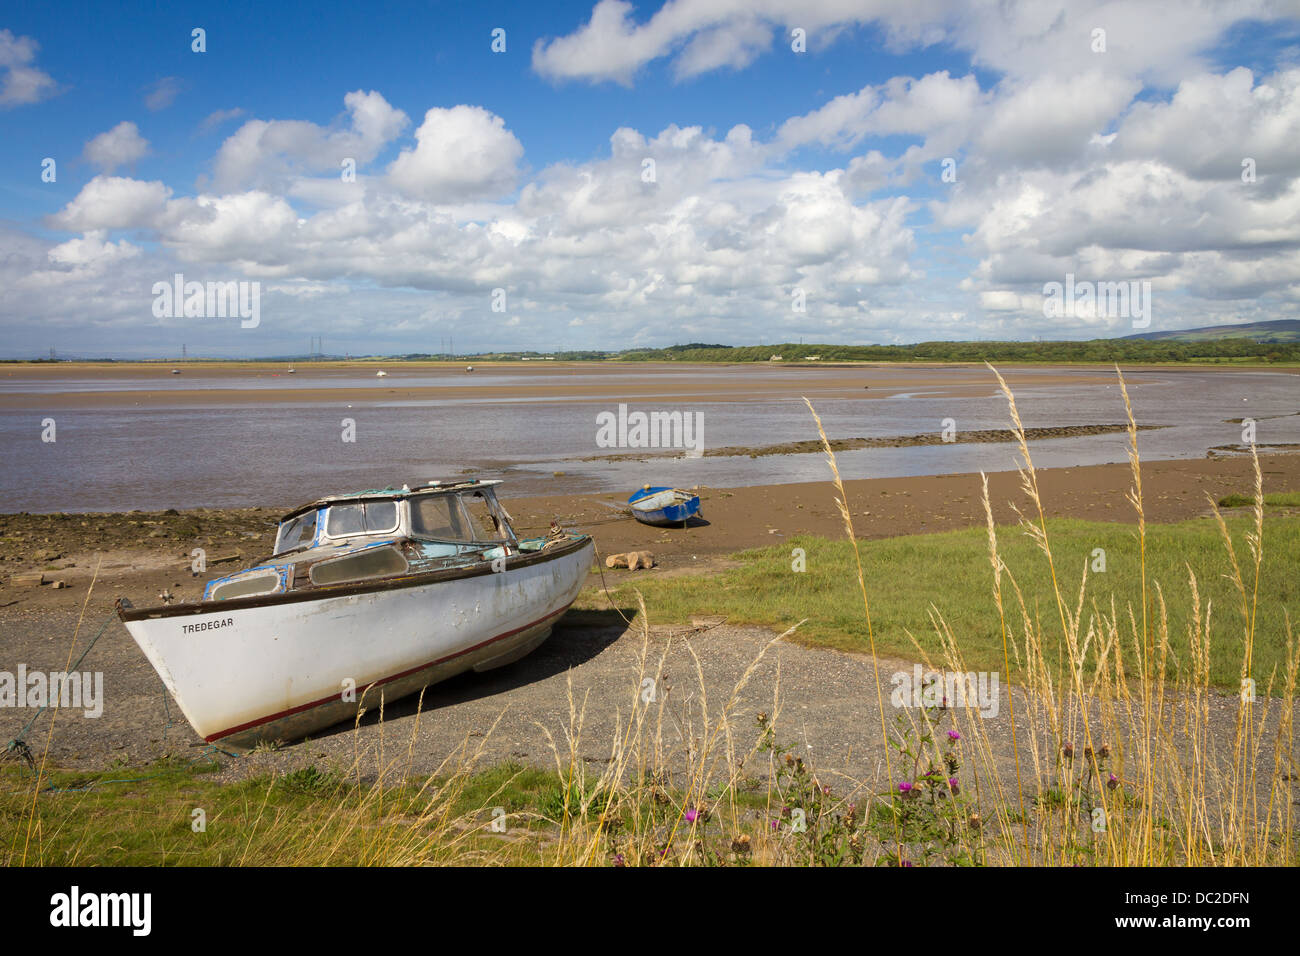 The River Lune at Glasson Dock during low tide with boat. City of Lancaster District. Lancashire. Stock Photo